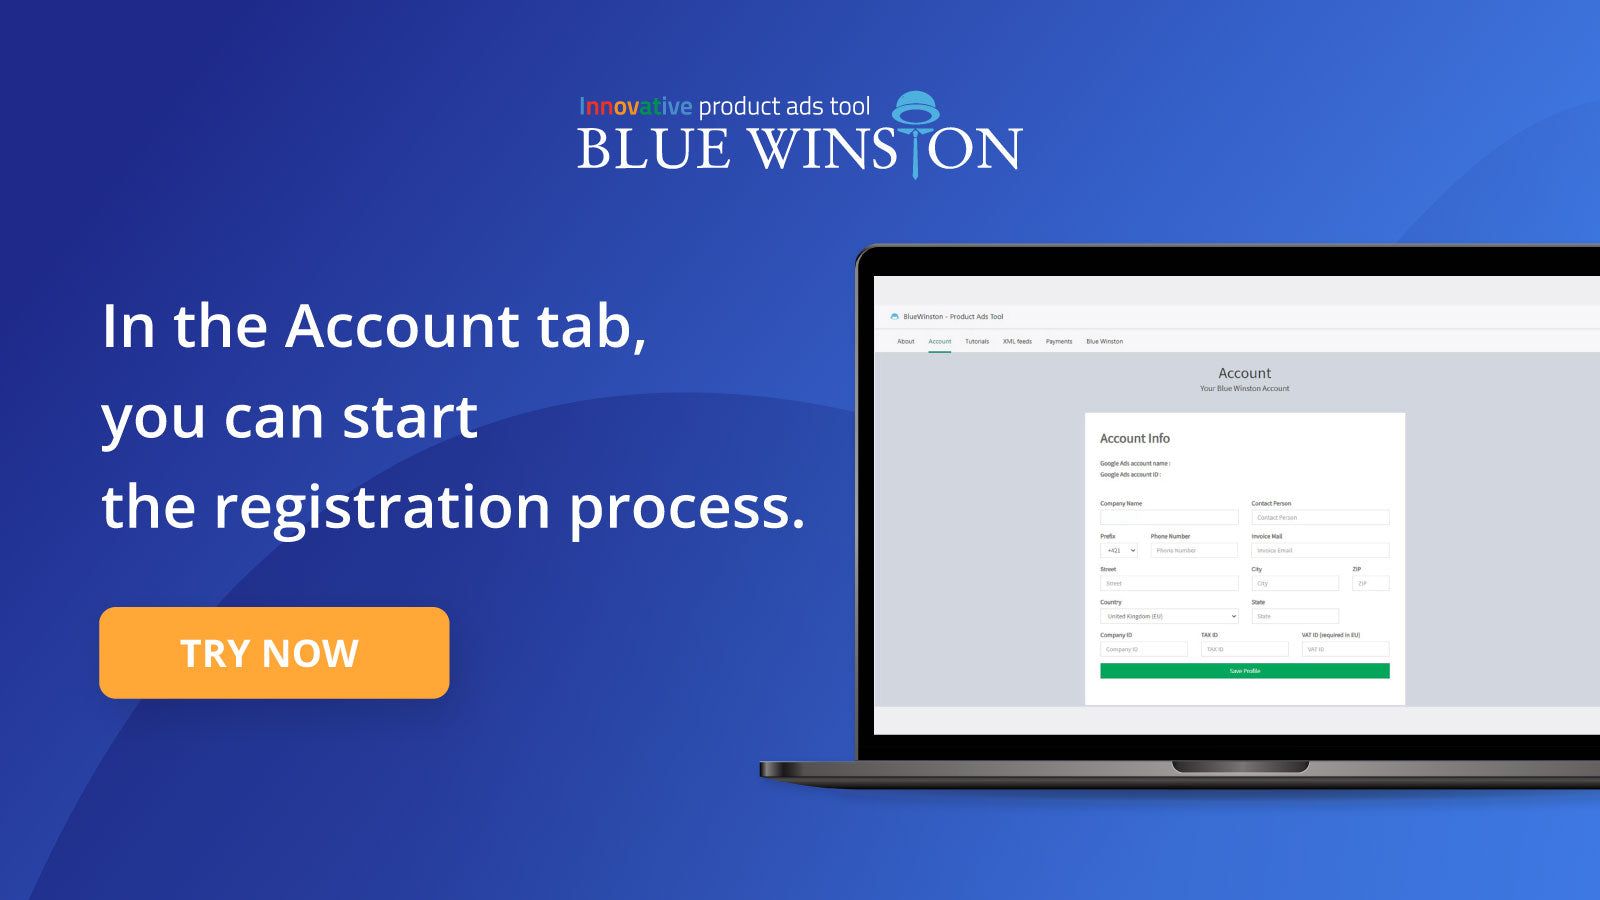 In the Account tab, you can start the registration process